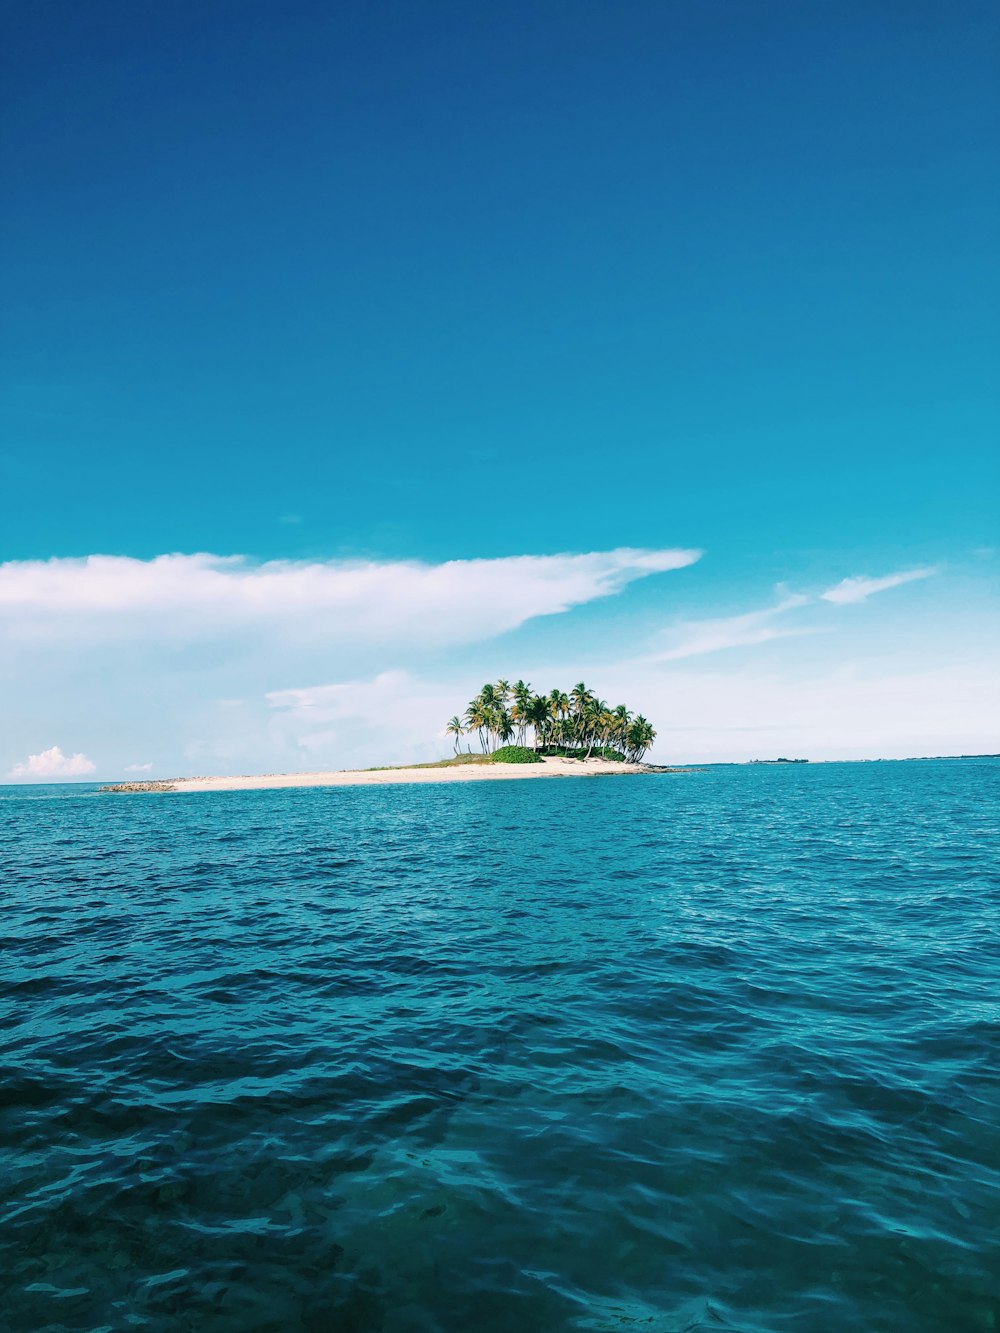 green trees on island surrounded by sea water under blue sky during daytime